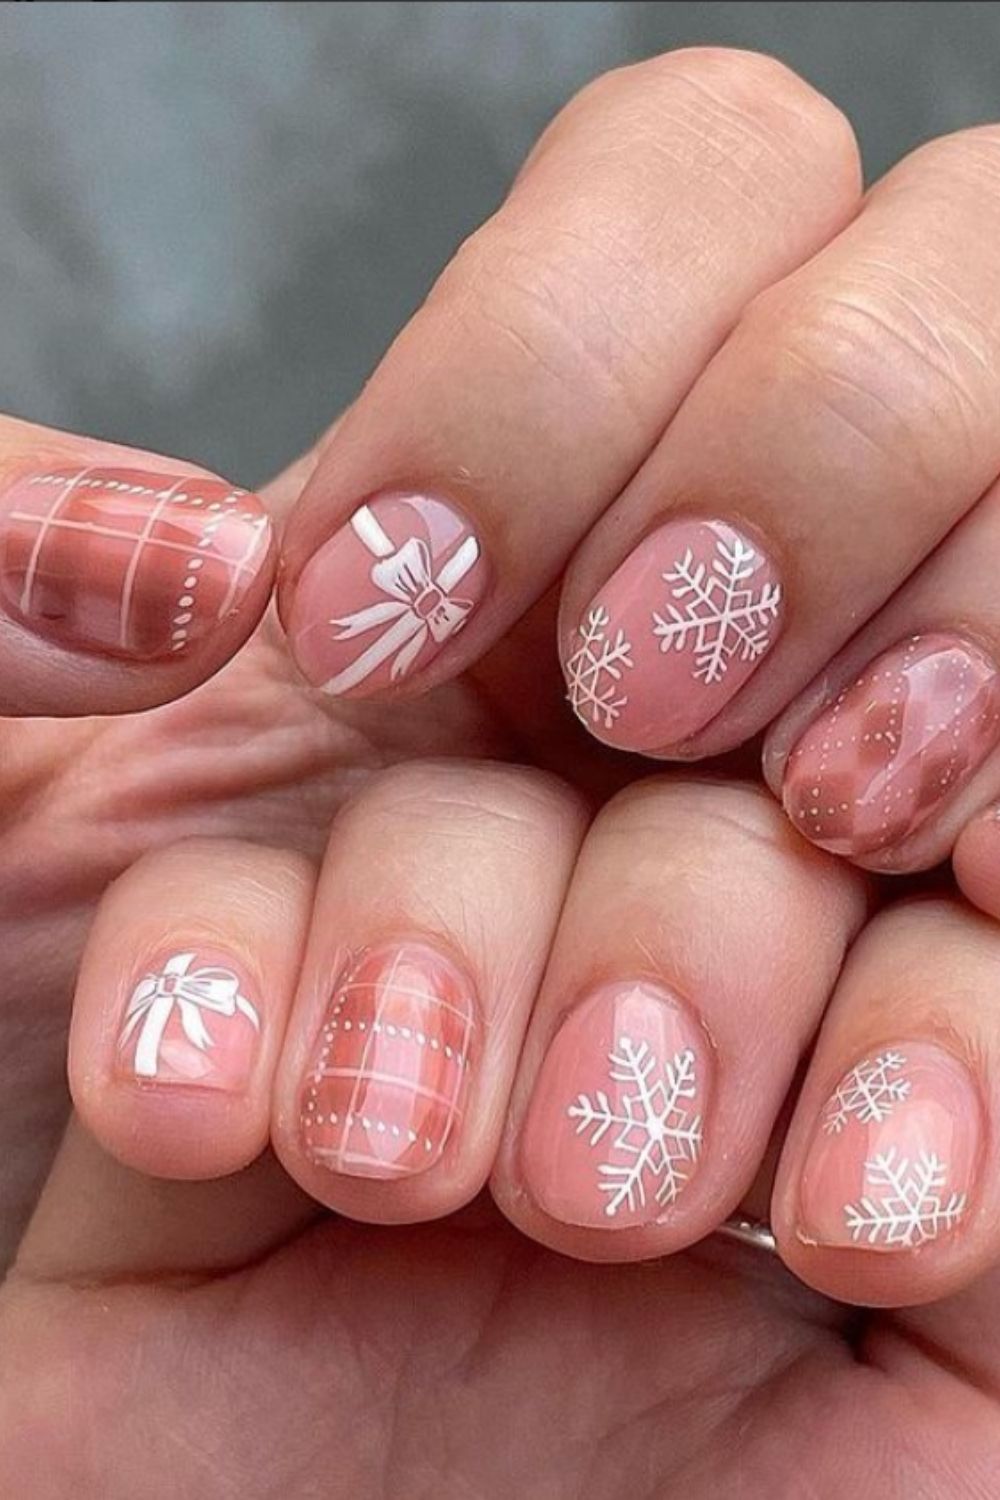  White and pink short nails